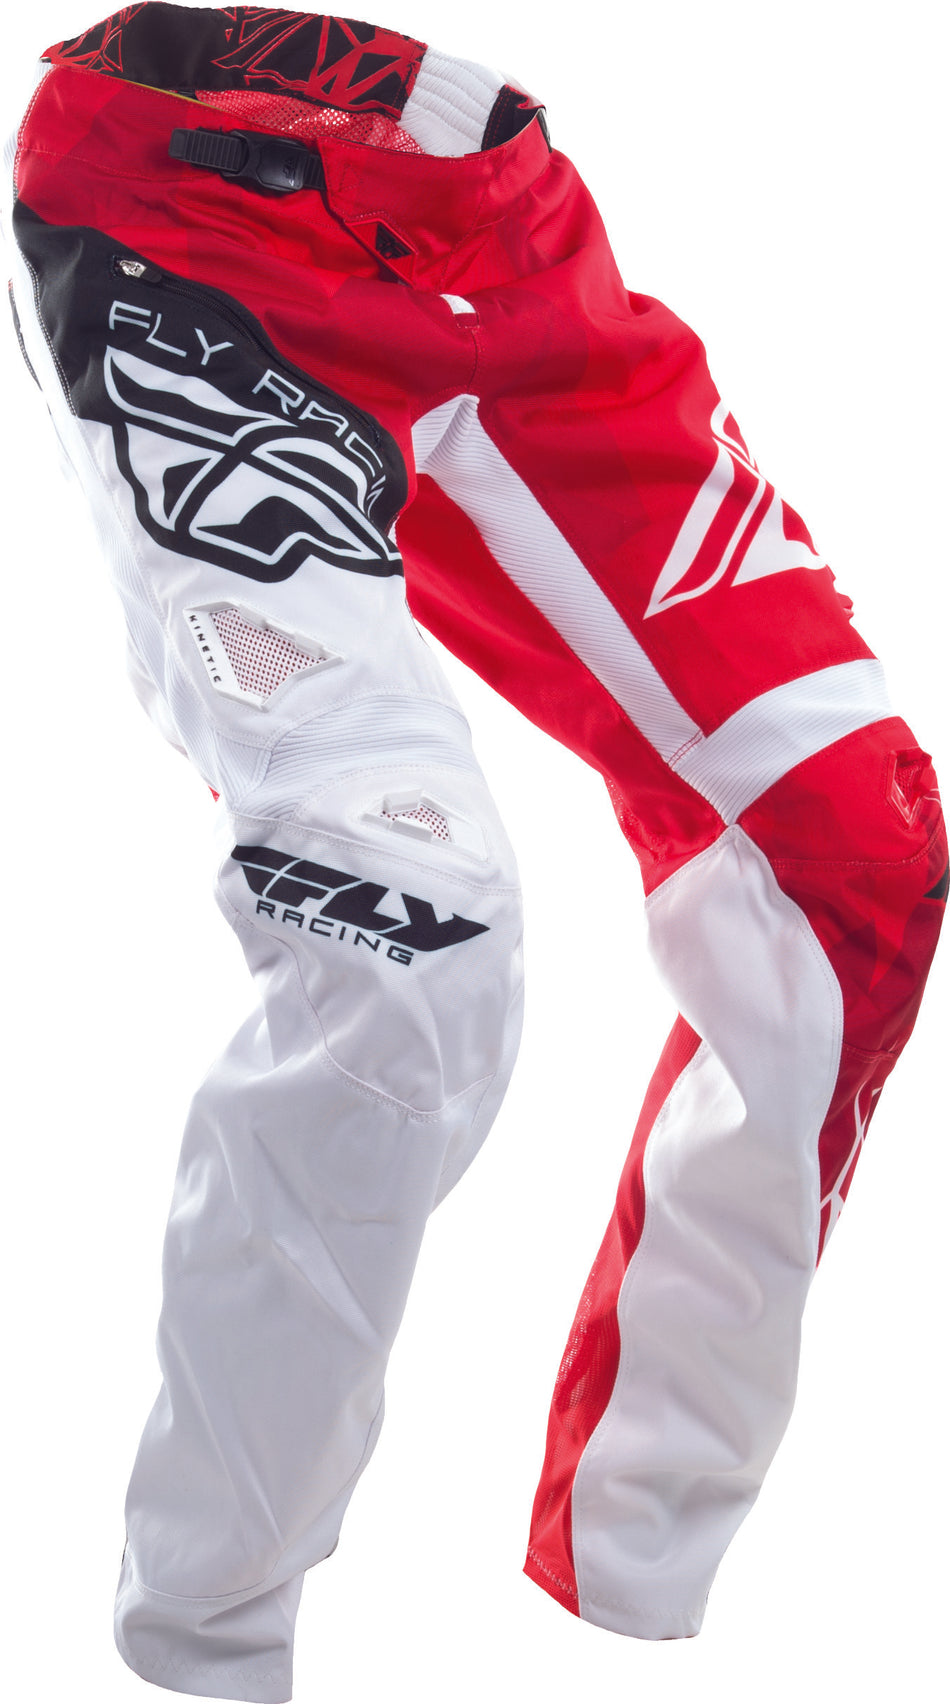 FLY RACING Bicycle Crux Pant Red/White Sz 36 370-02236